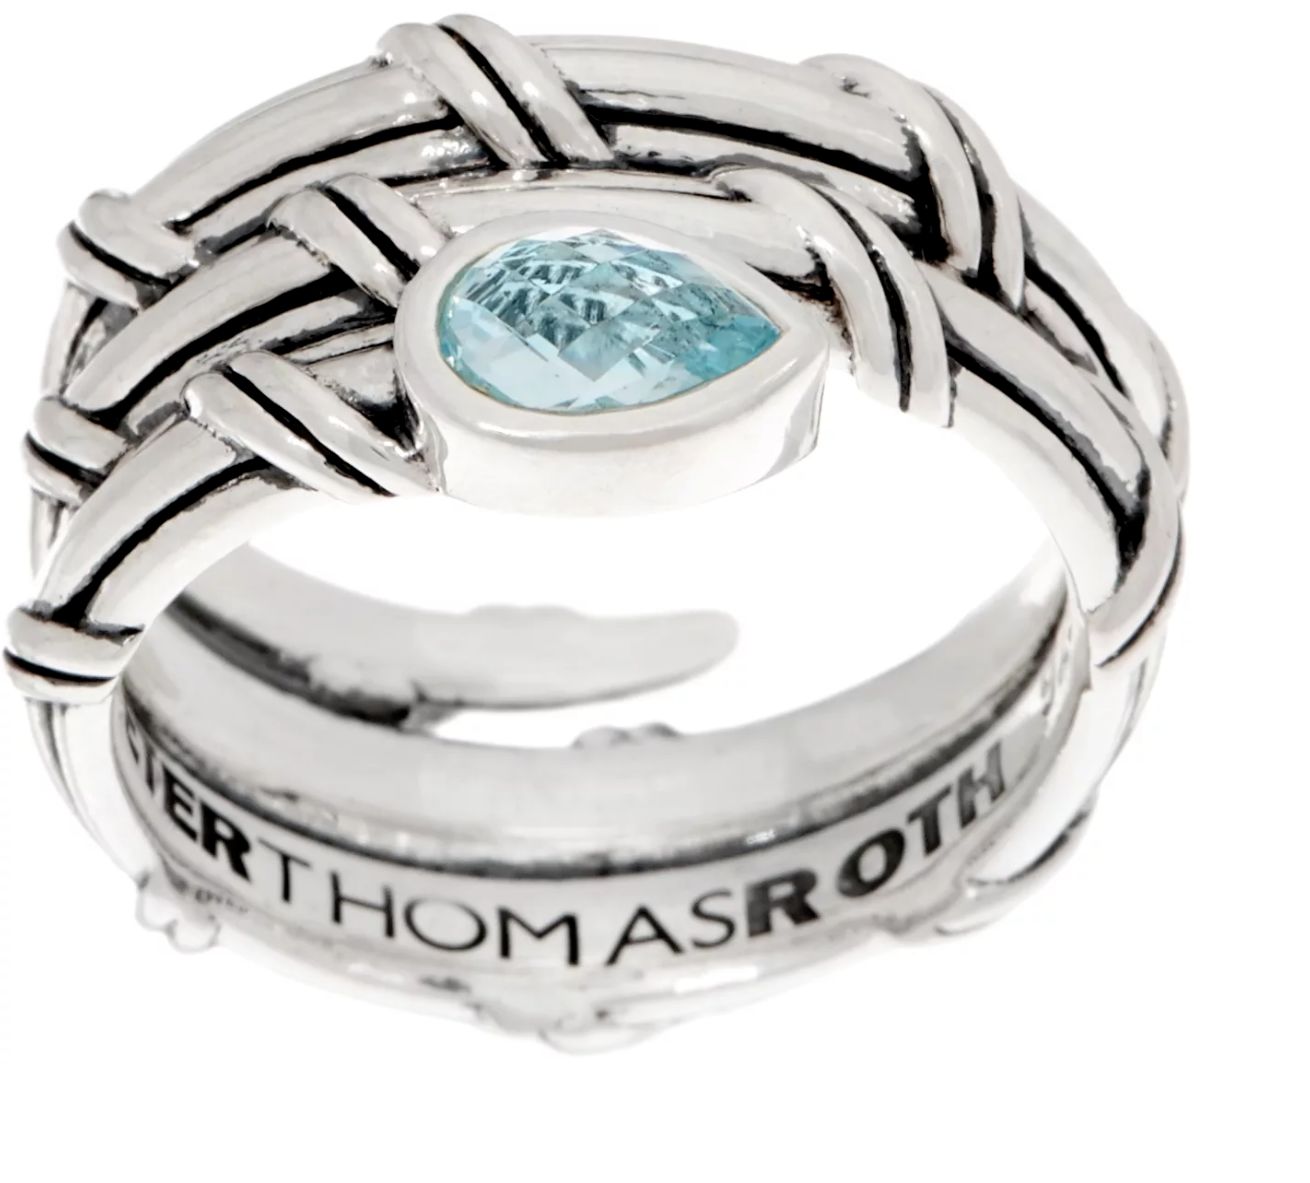 Peter Thomas Roth Sterling Silver Blue Topaz Wrap Ring. Size 6